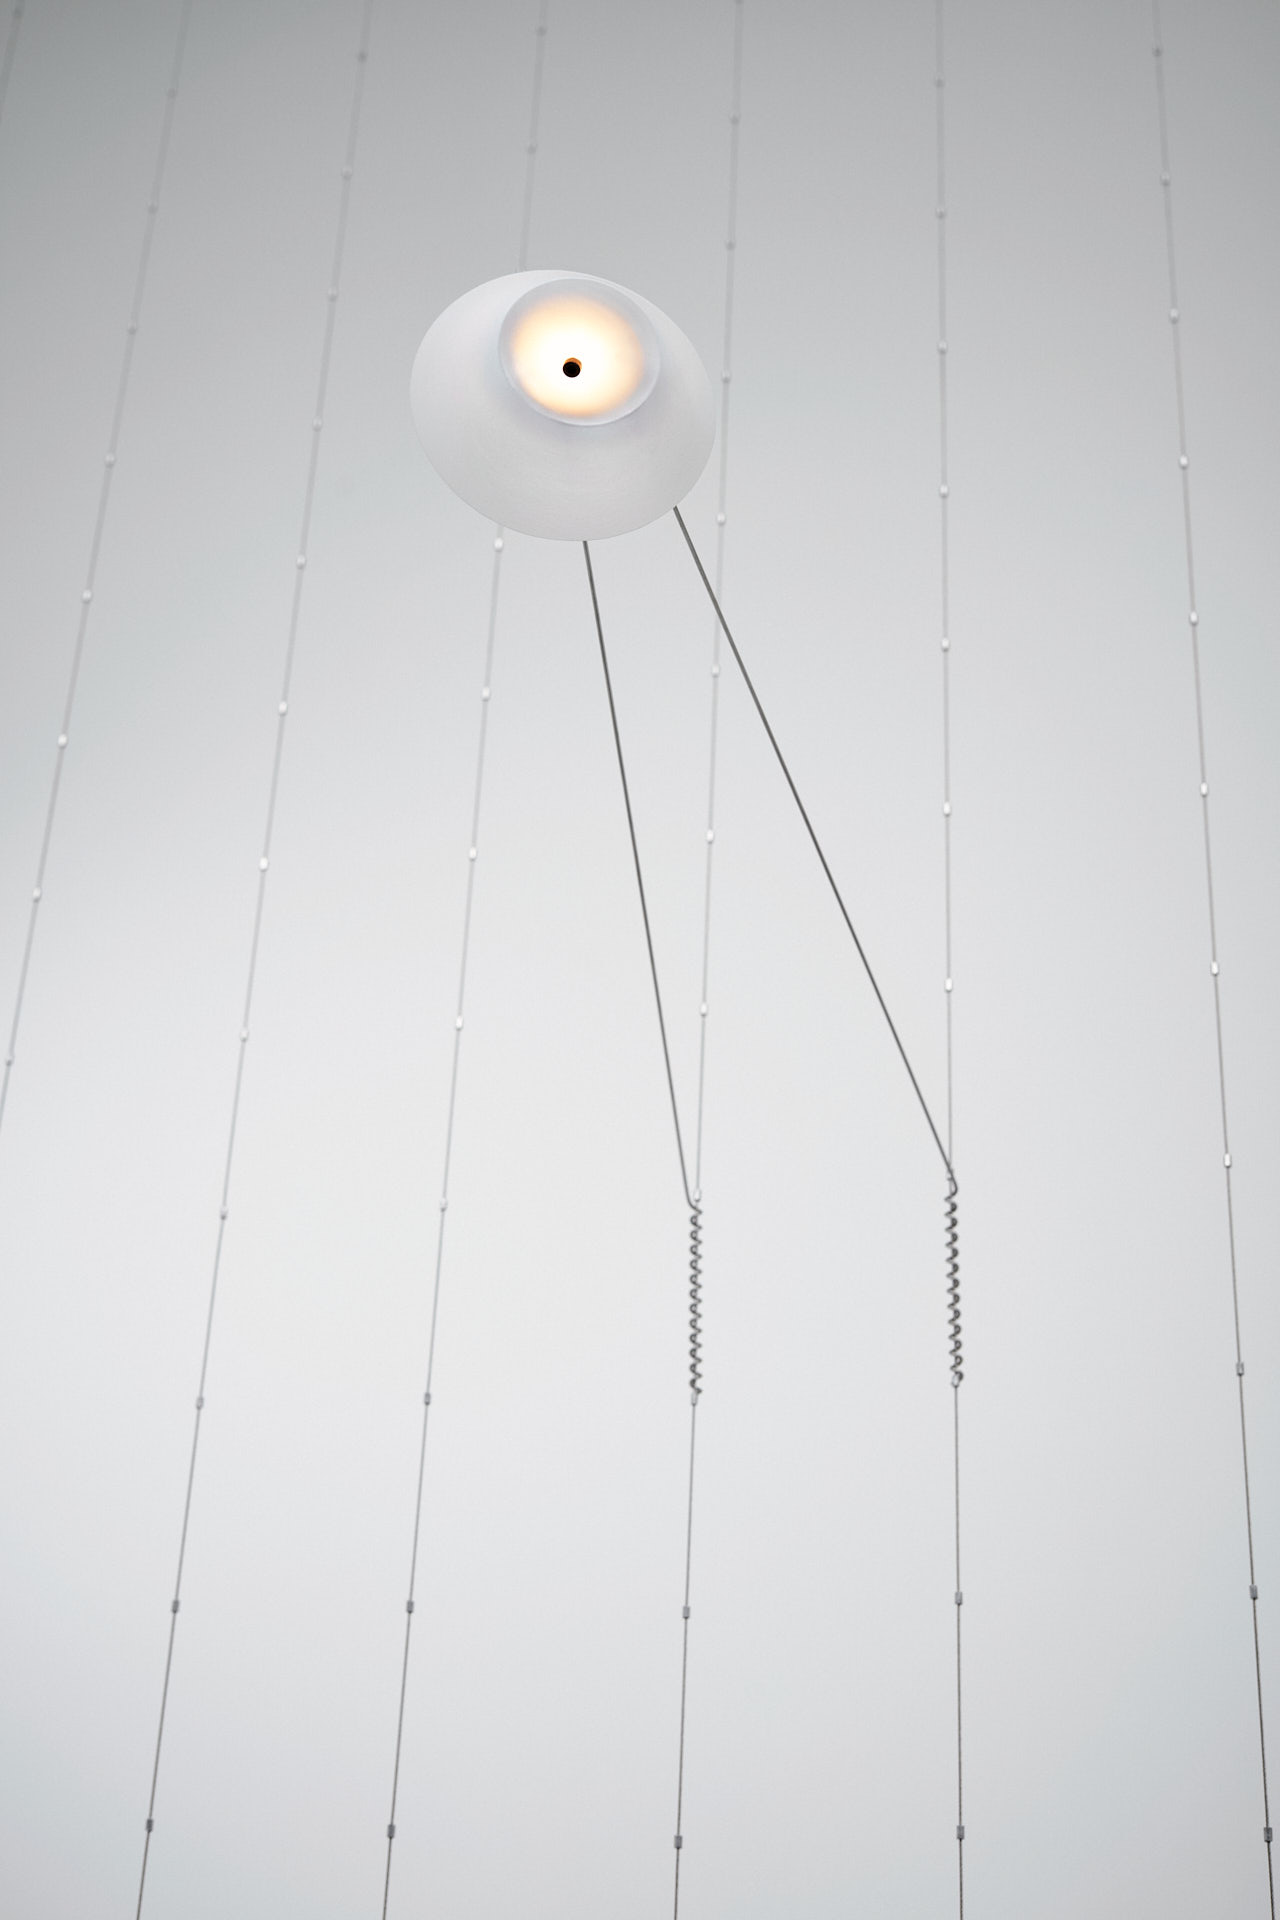 Single Liiu light element, lightweight minimalistic lampshade which seems to be floating.